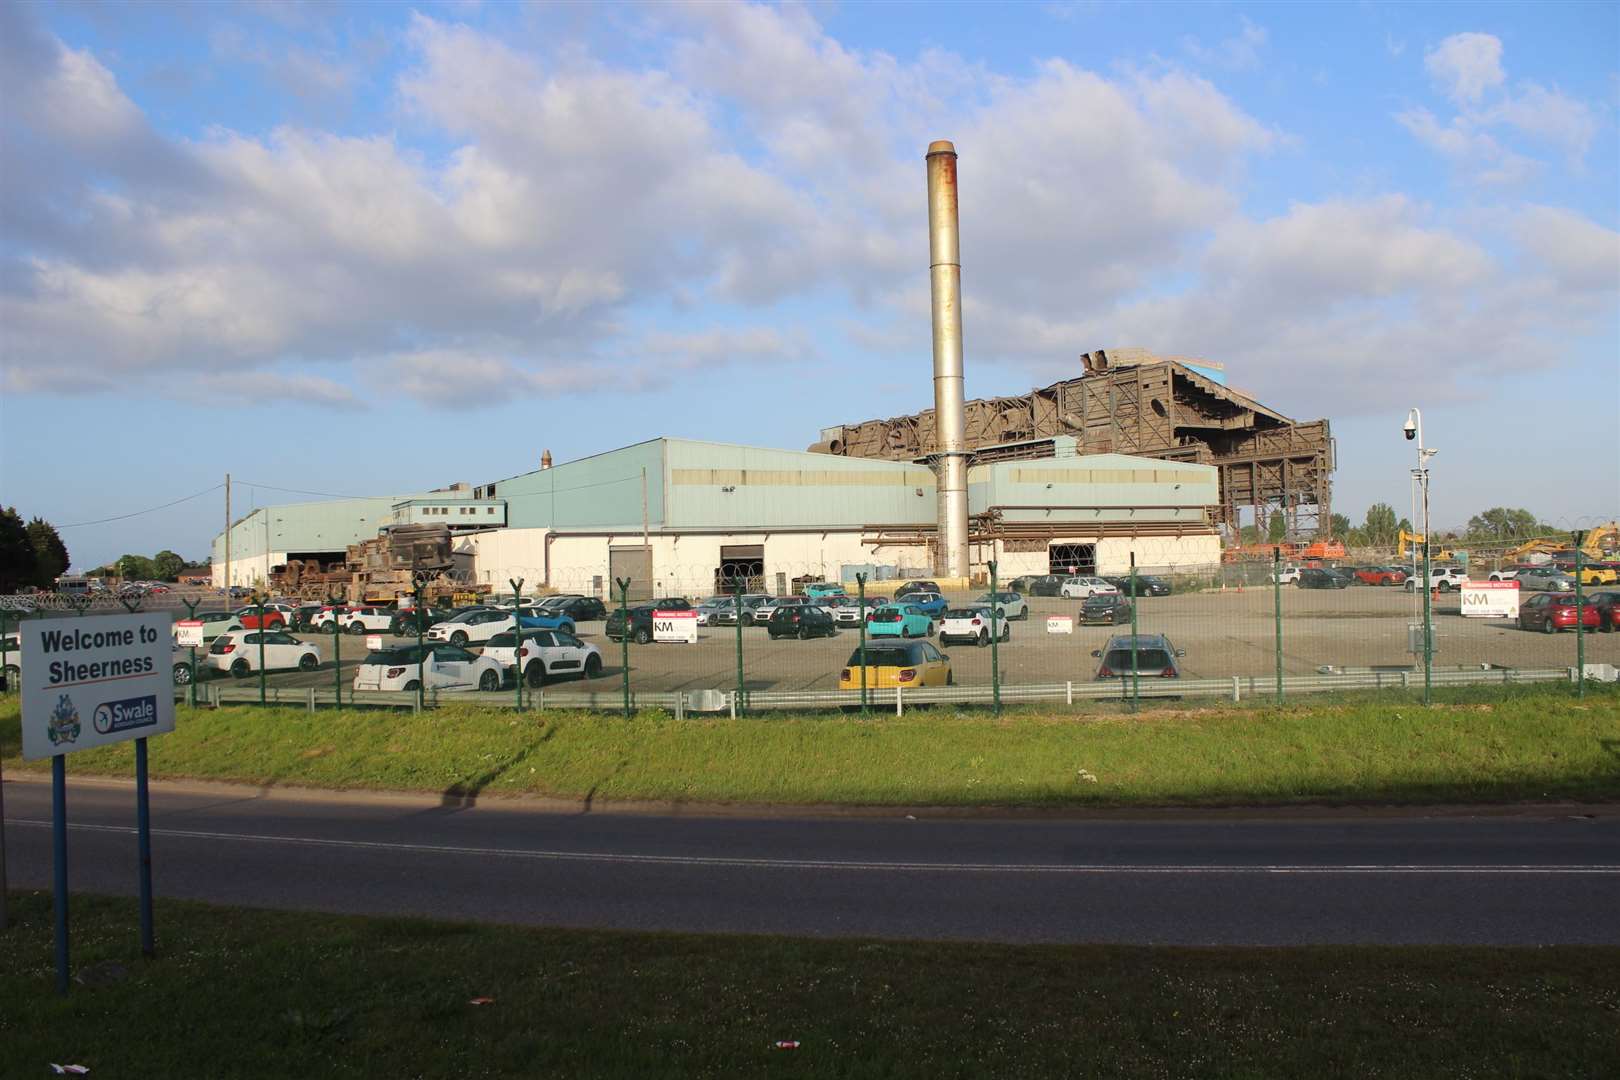 The former Sheerness steel mill before it was demolished